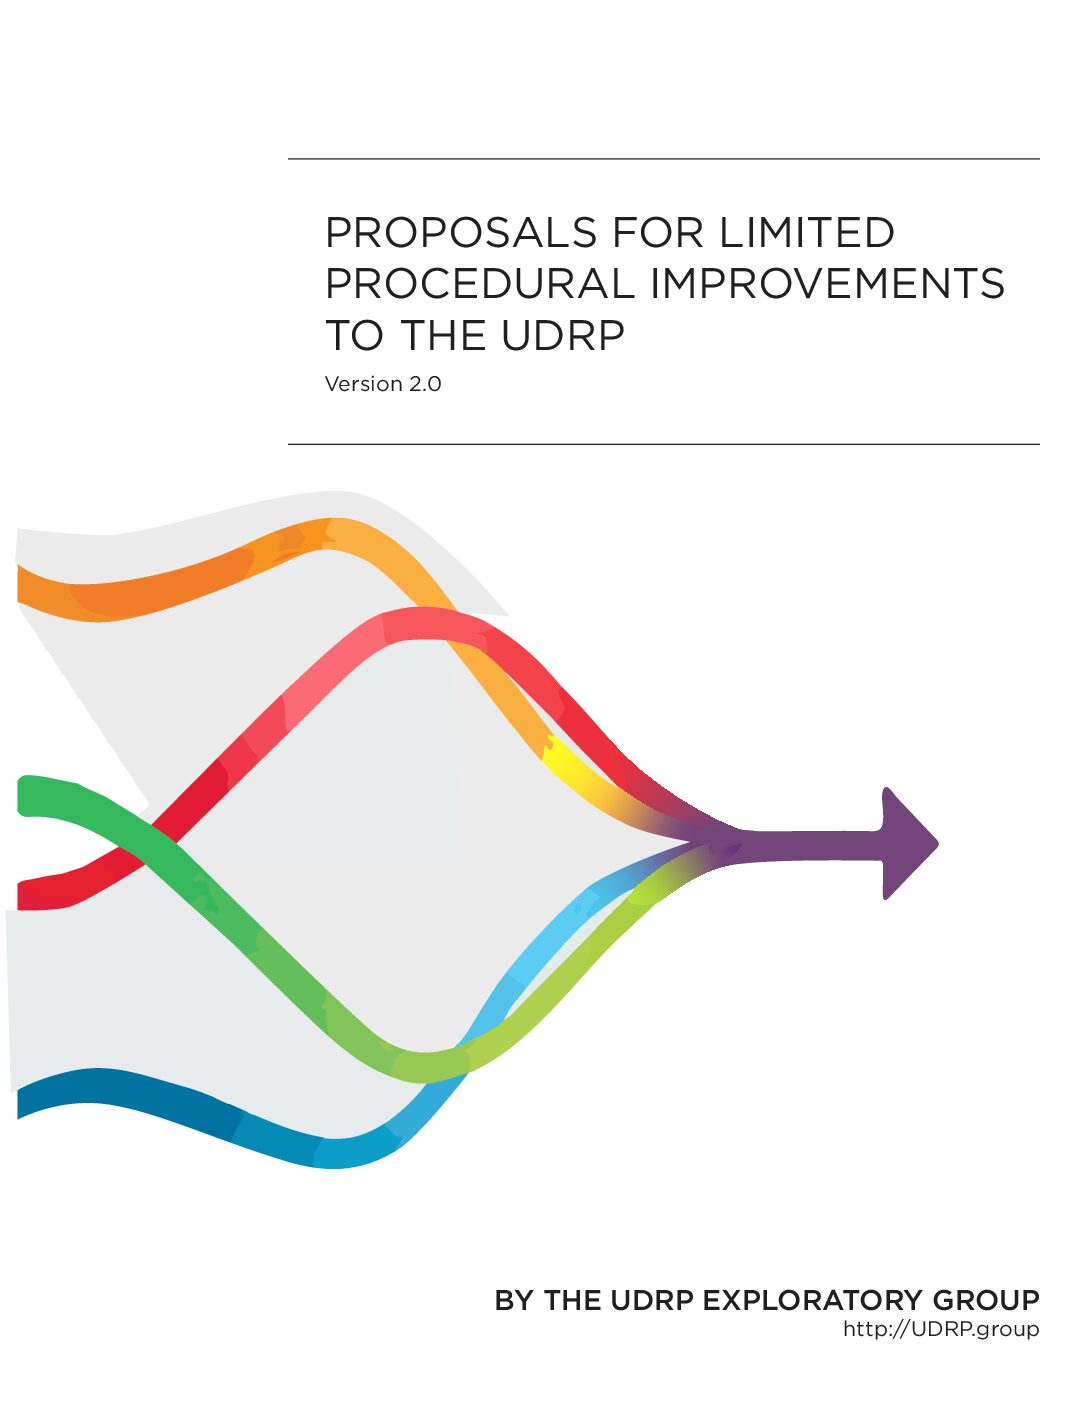 Proposals to improve the UDRP